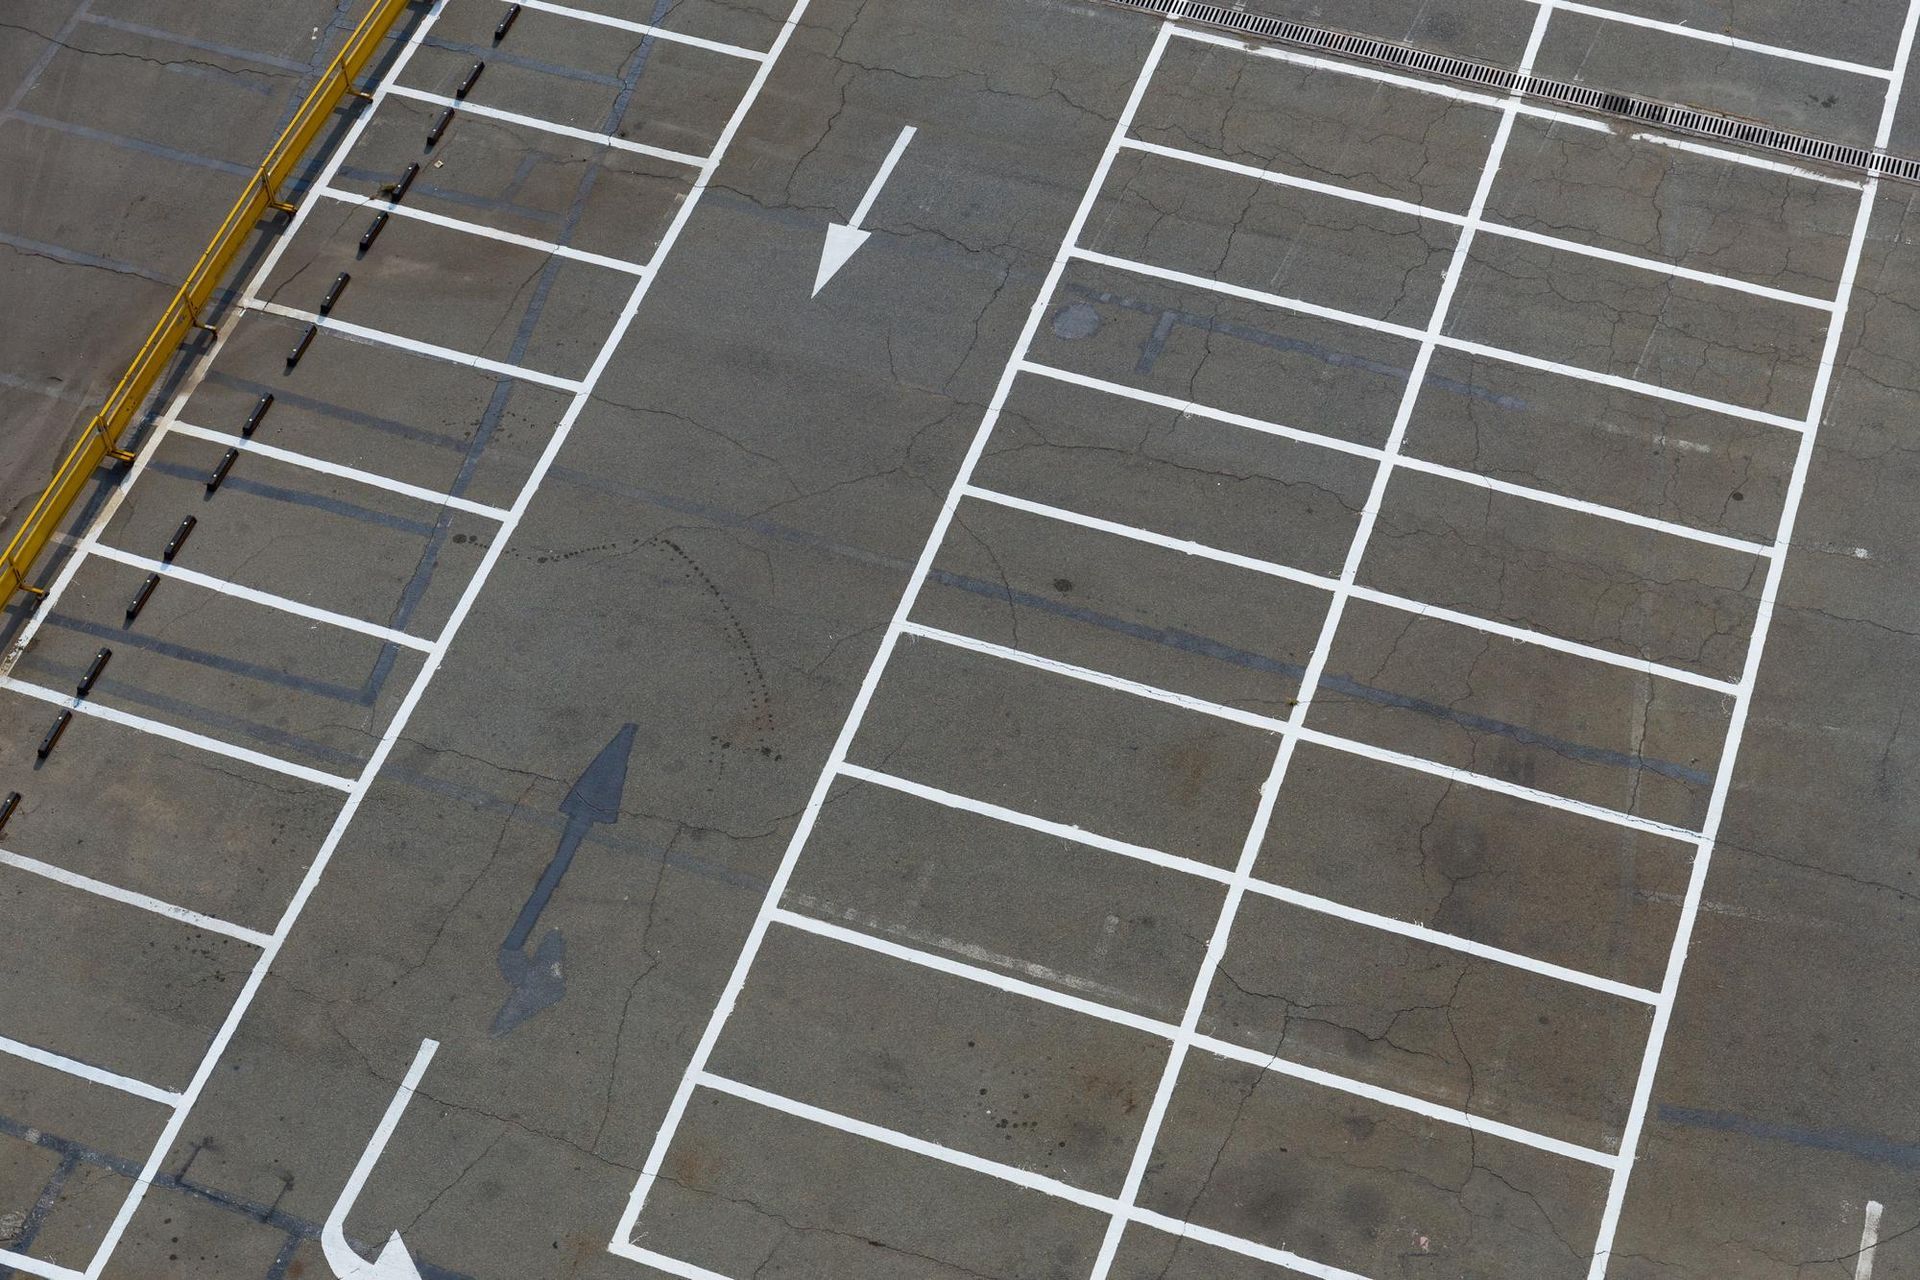 A parking lot with white lines and an arrow pointing to the right